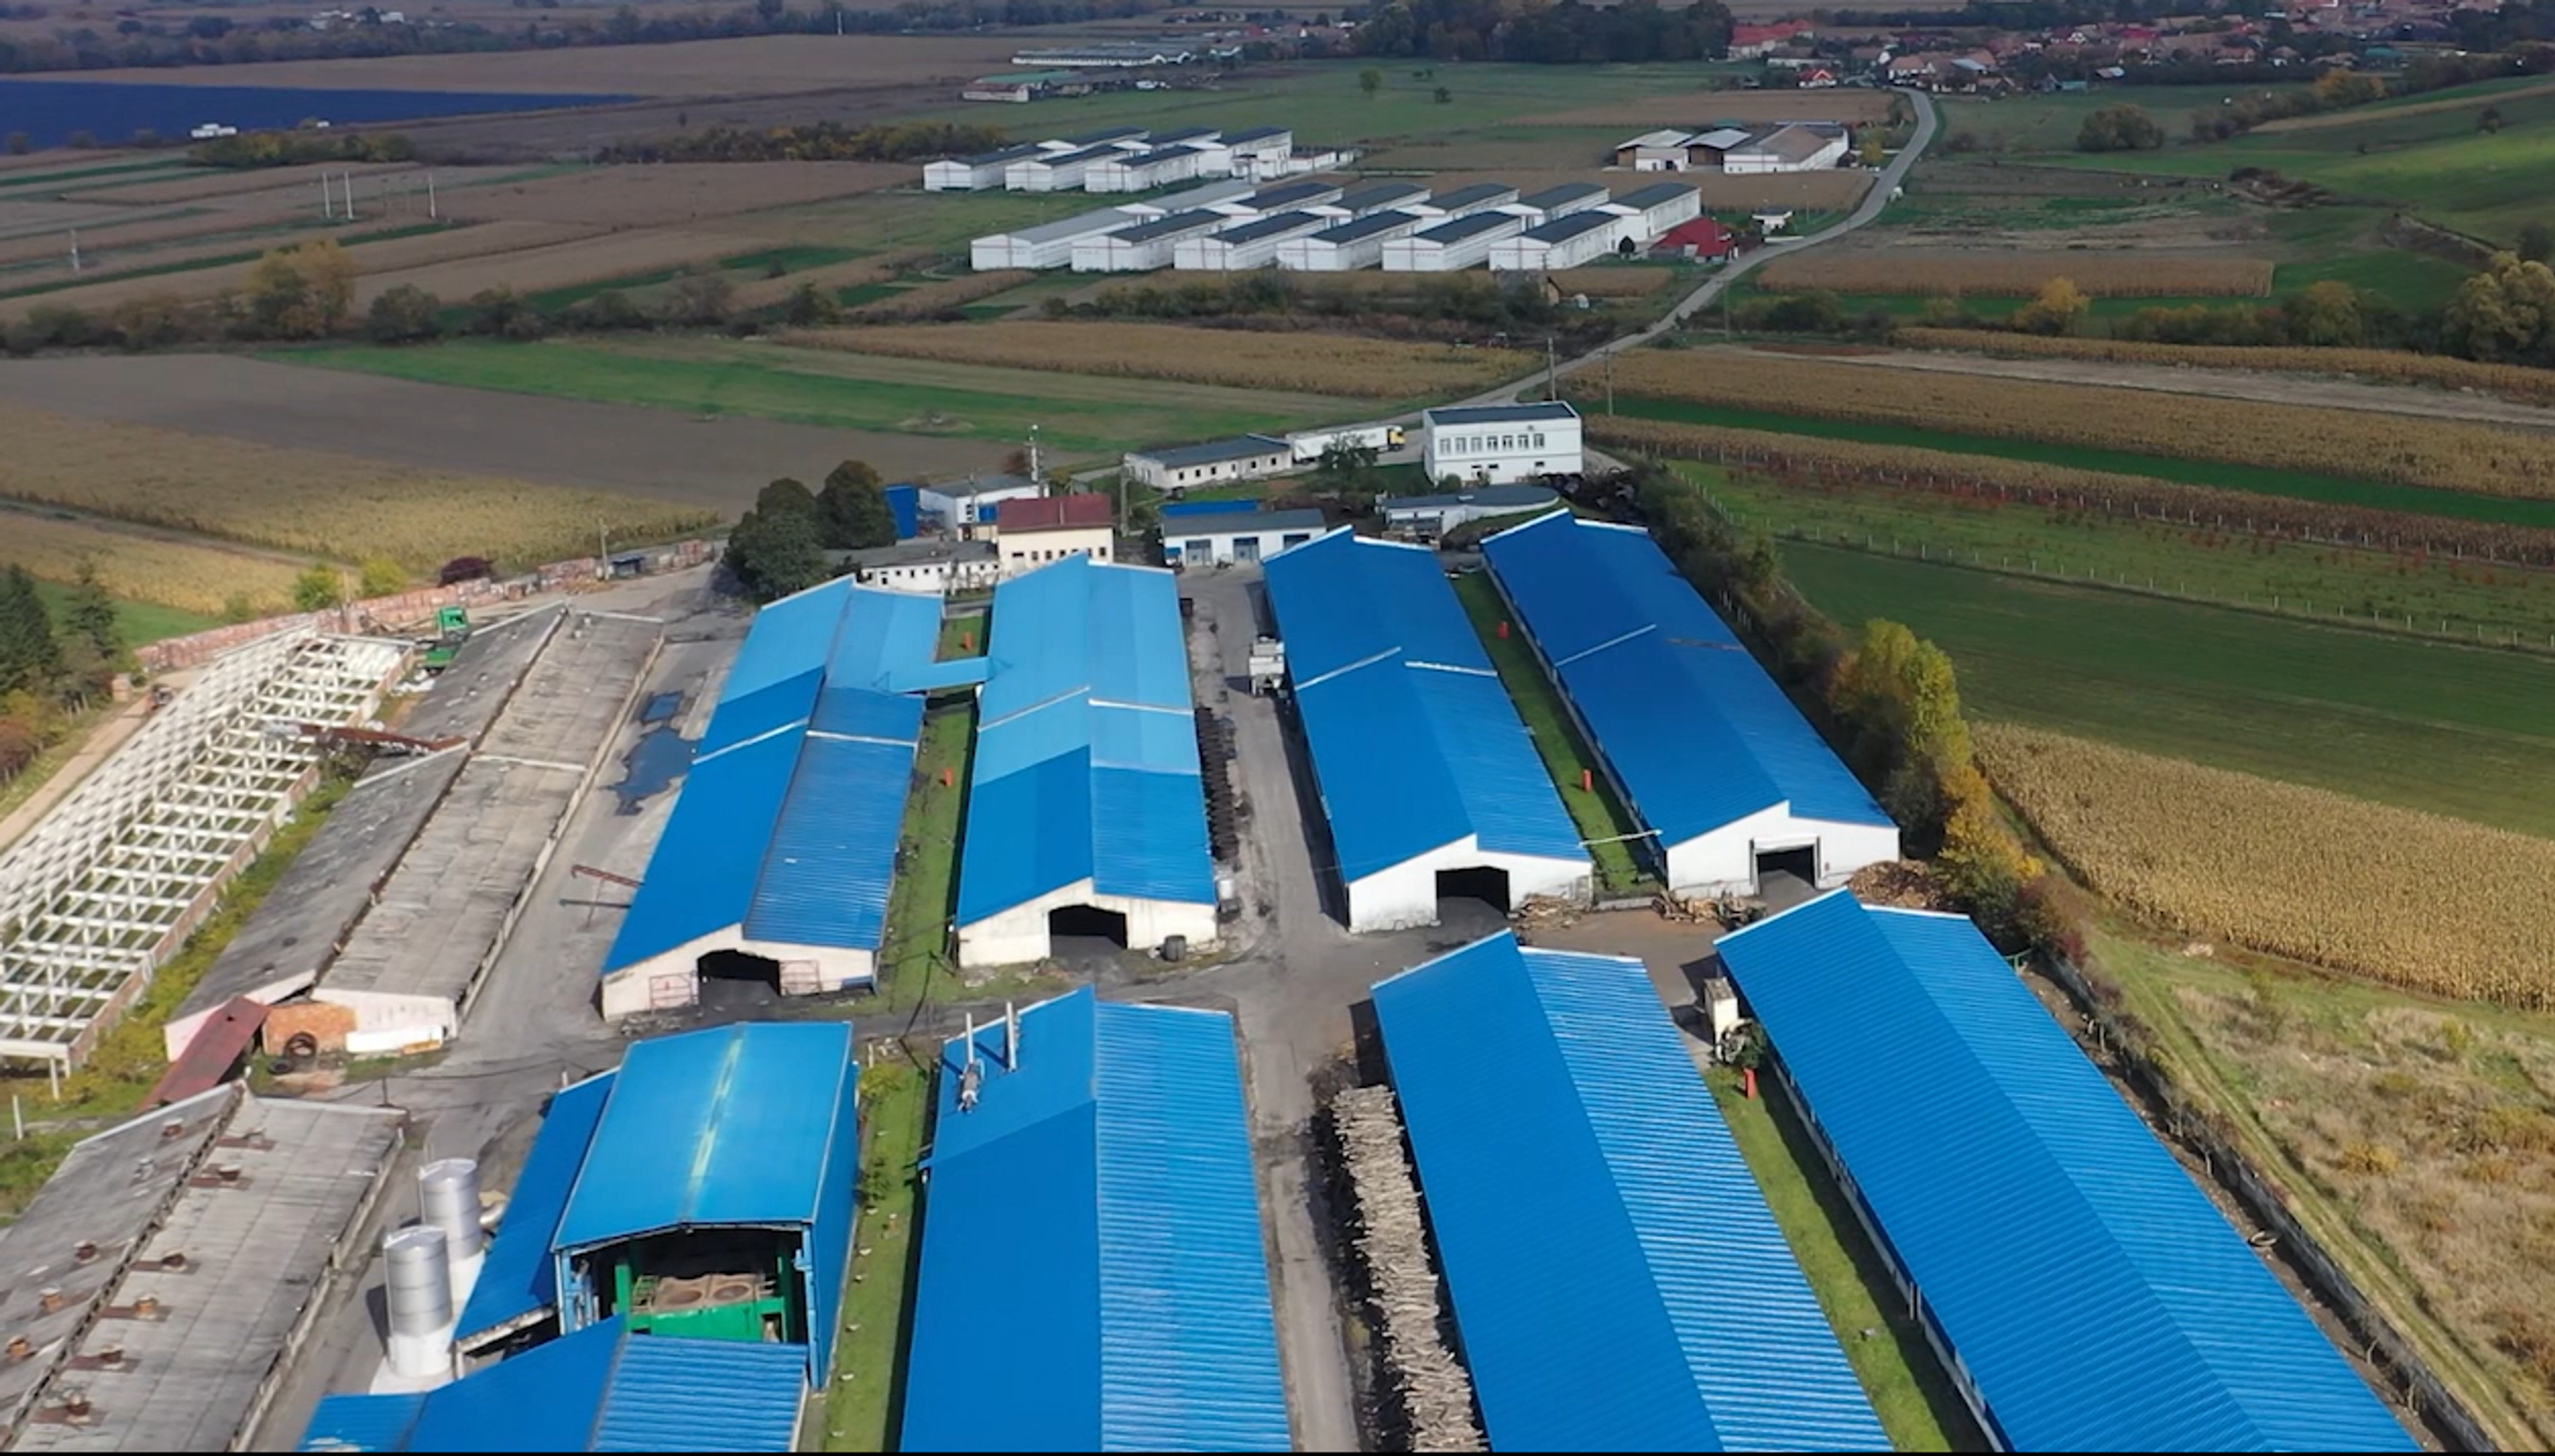 Production facilities for greens